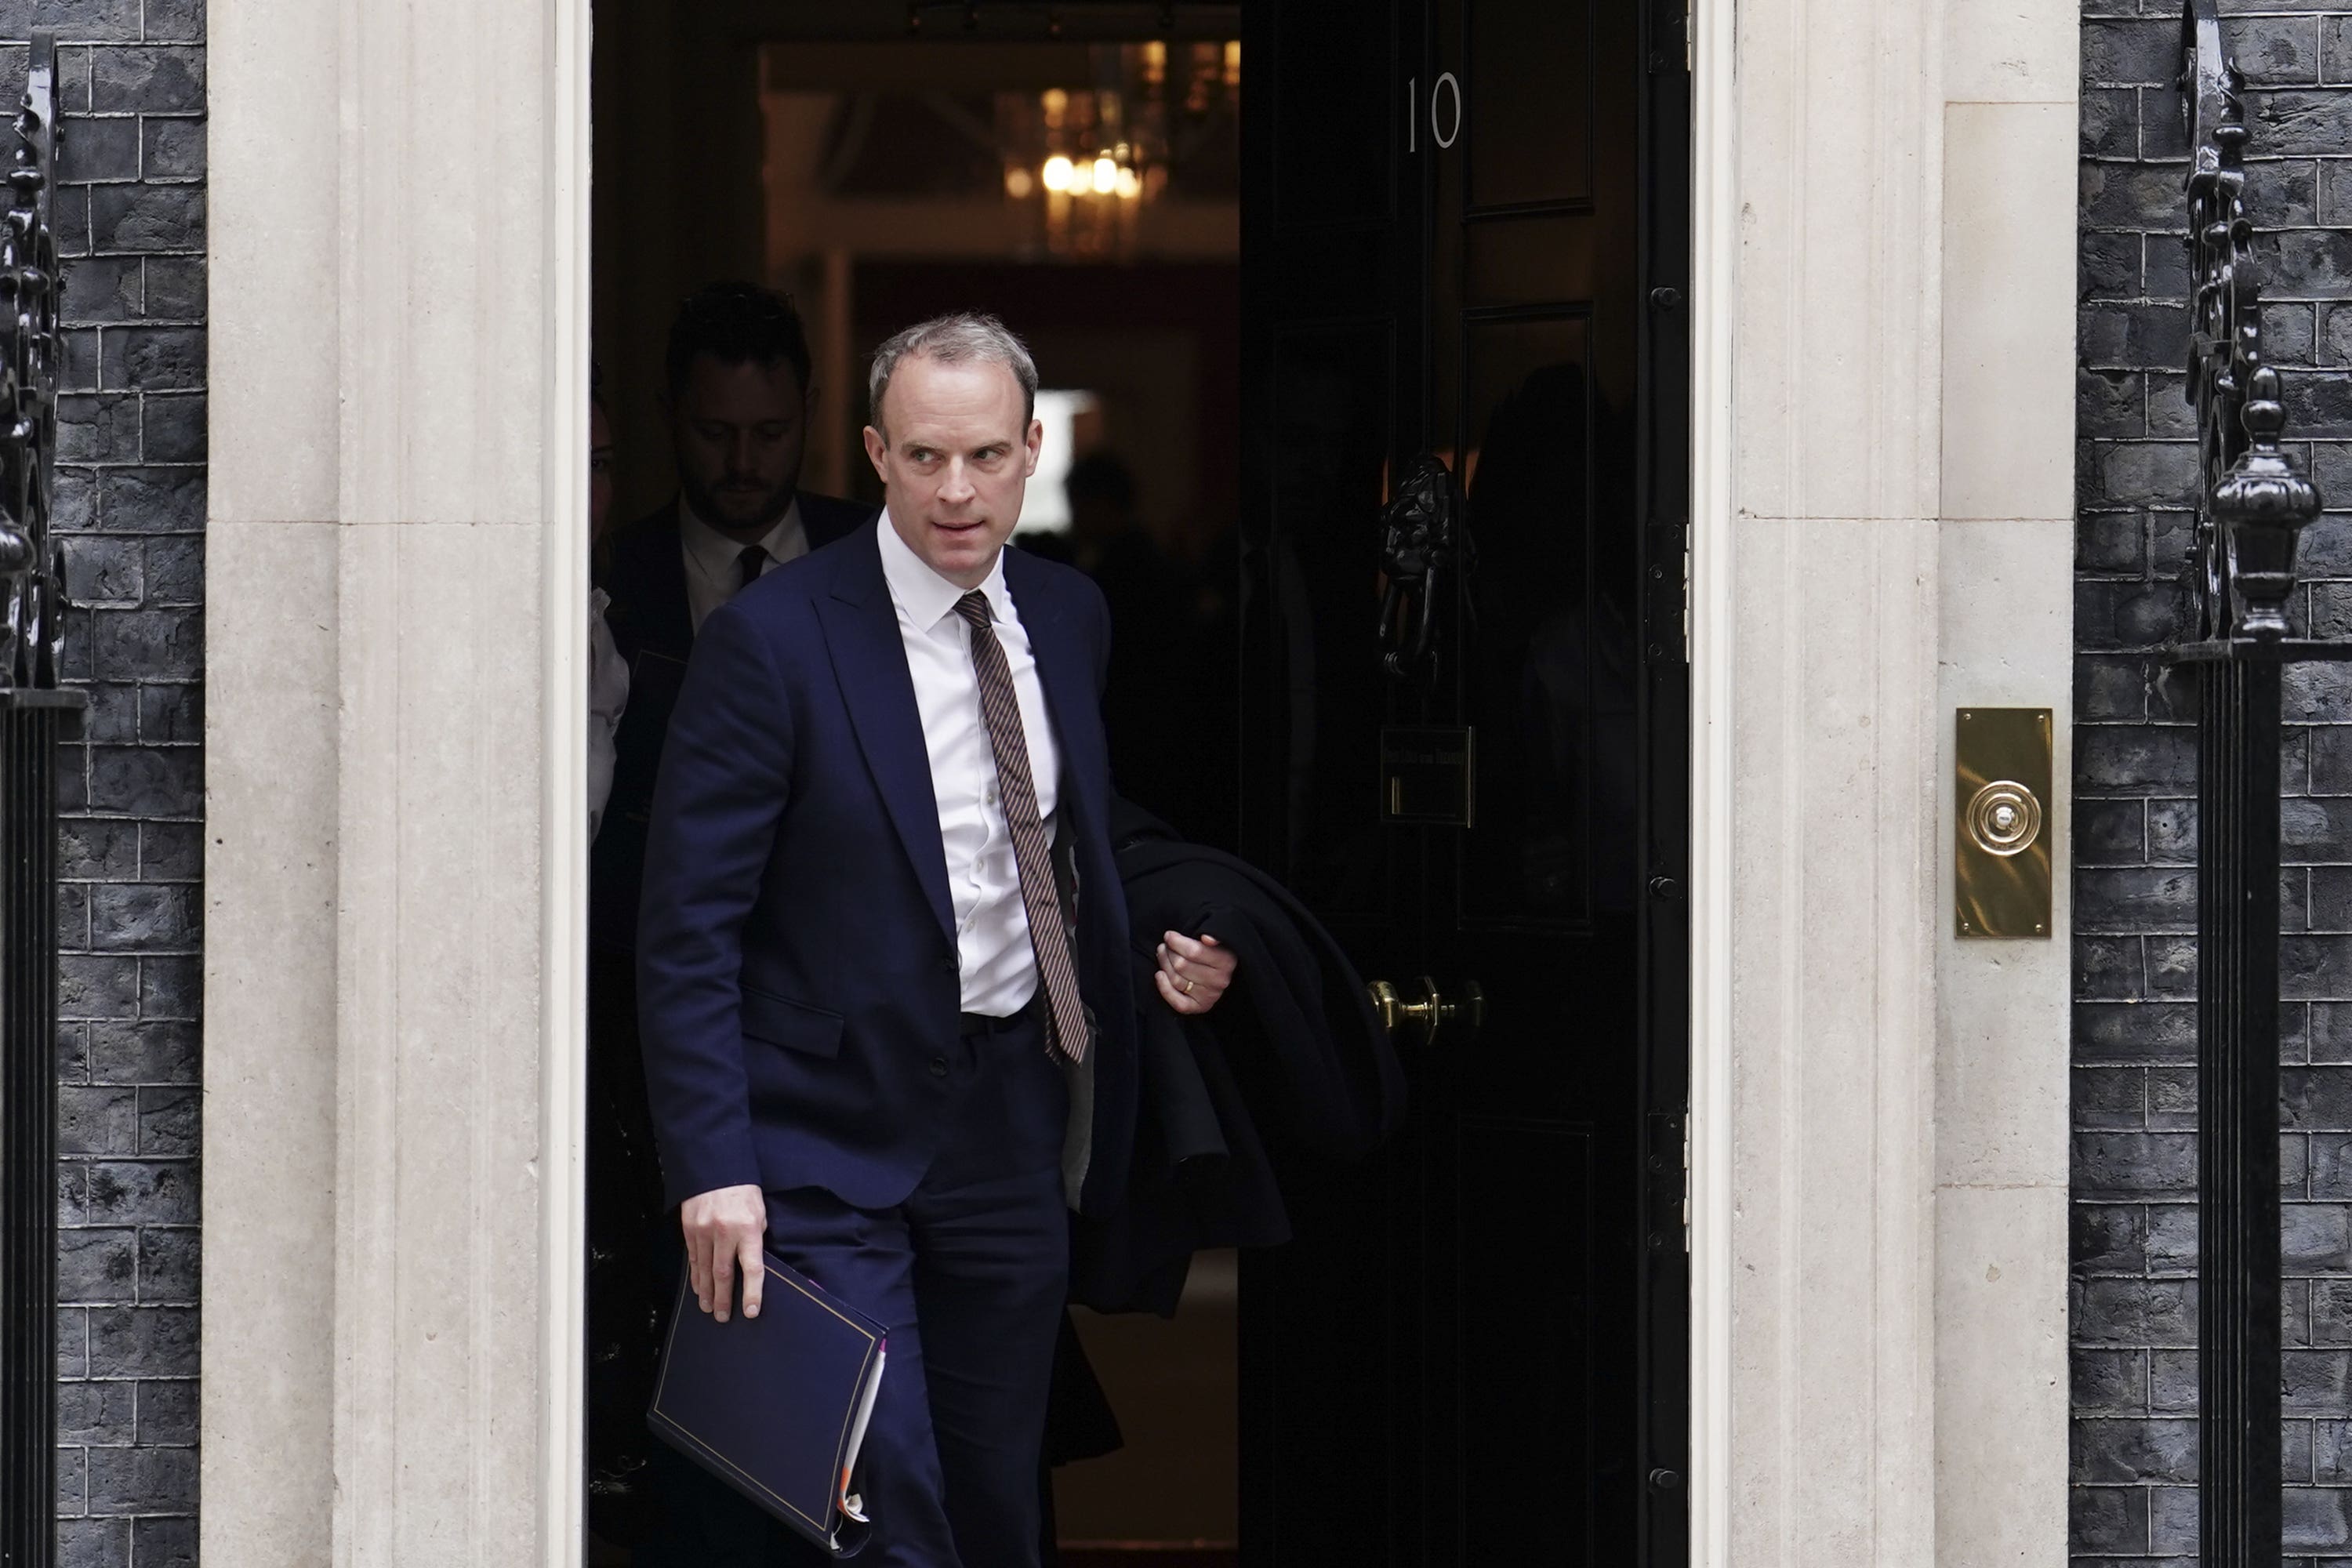 Deputy Prime Minister Dominic Raab, leaving 10 Downing Street following a Cabinet meeting on Tuesday